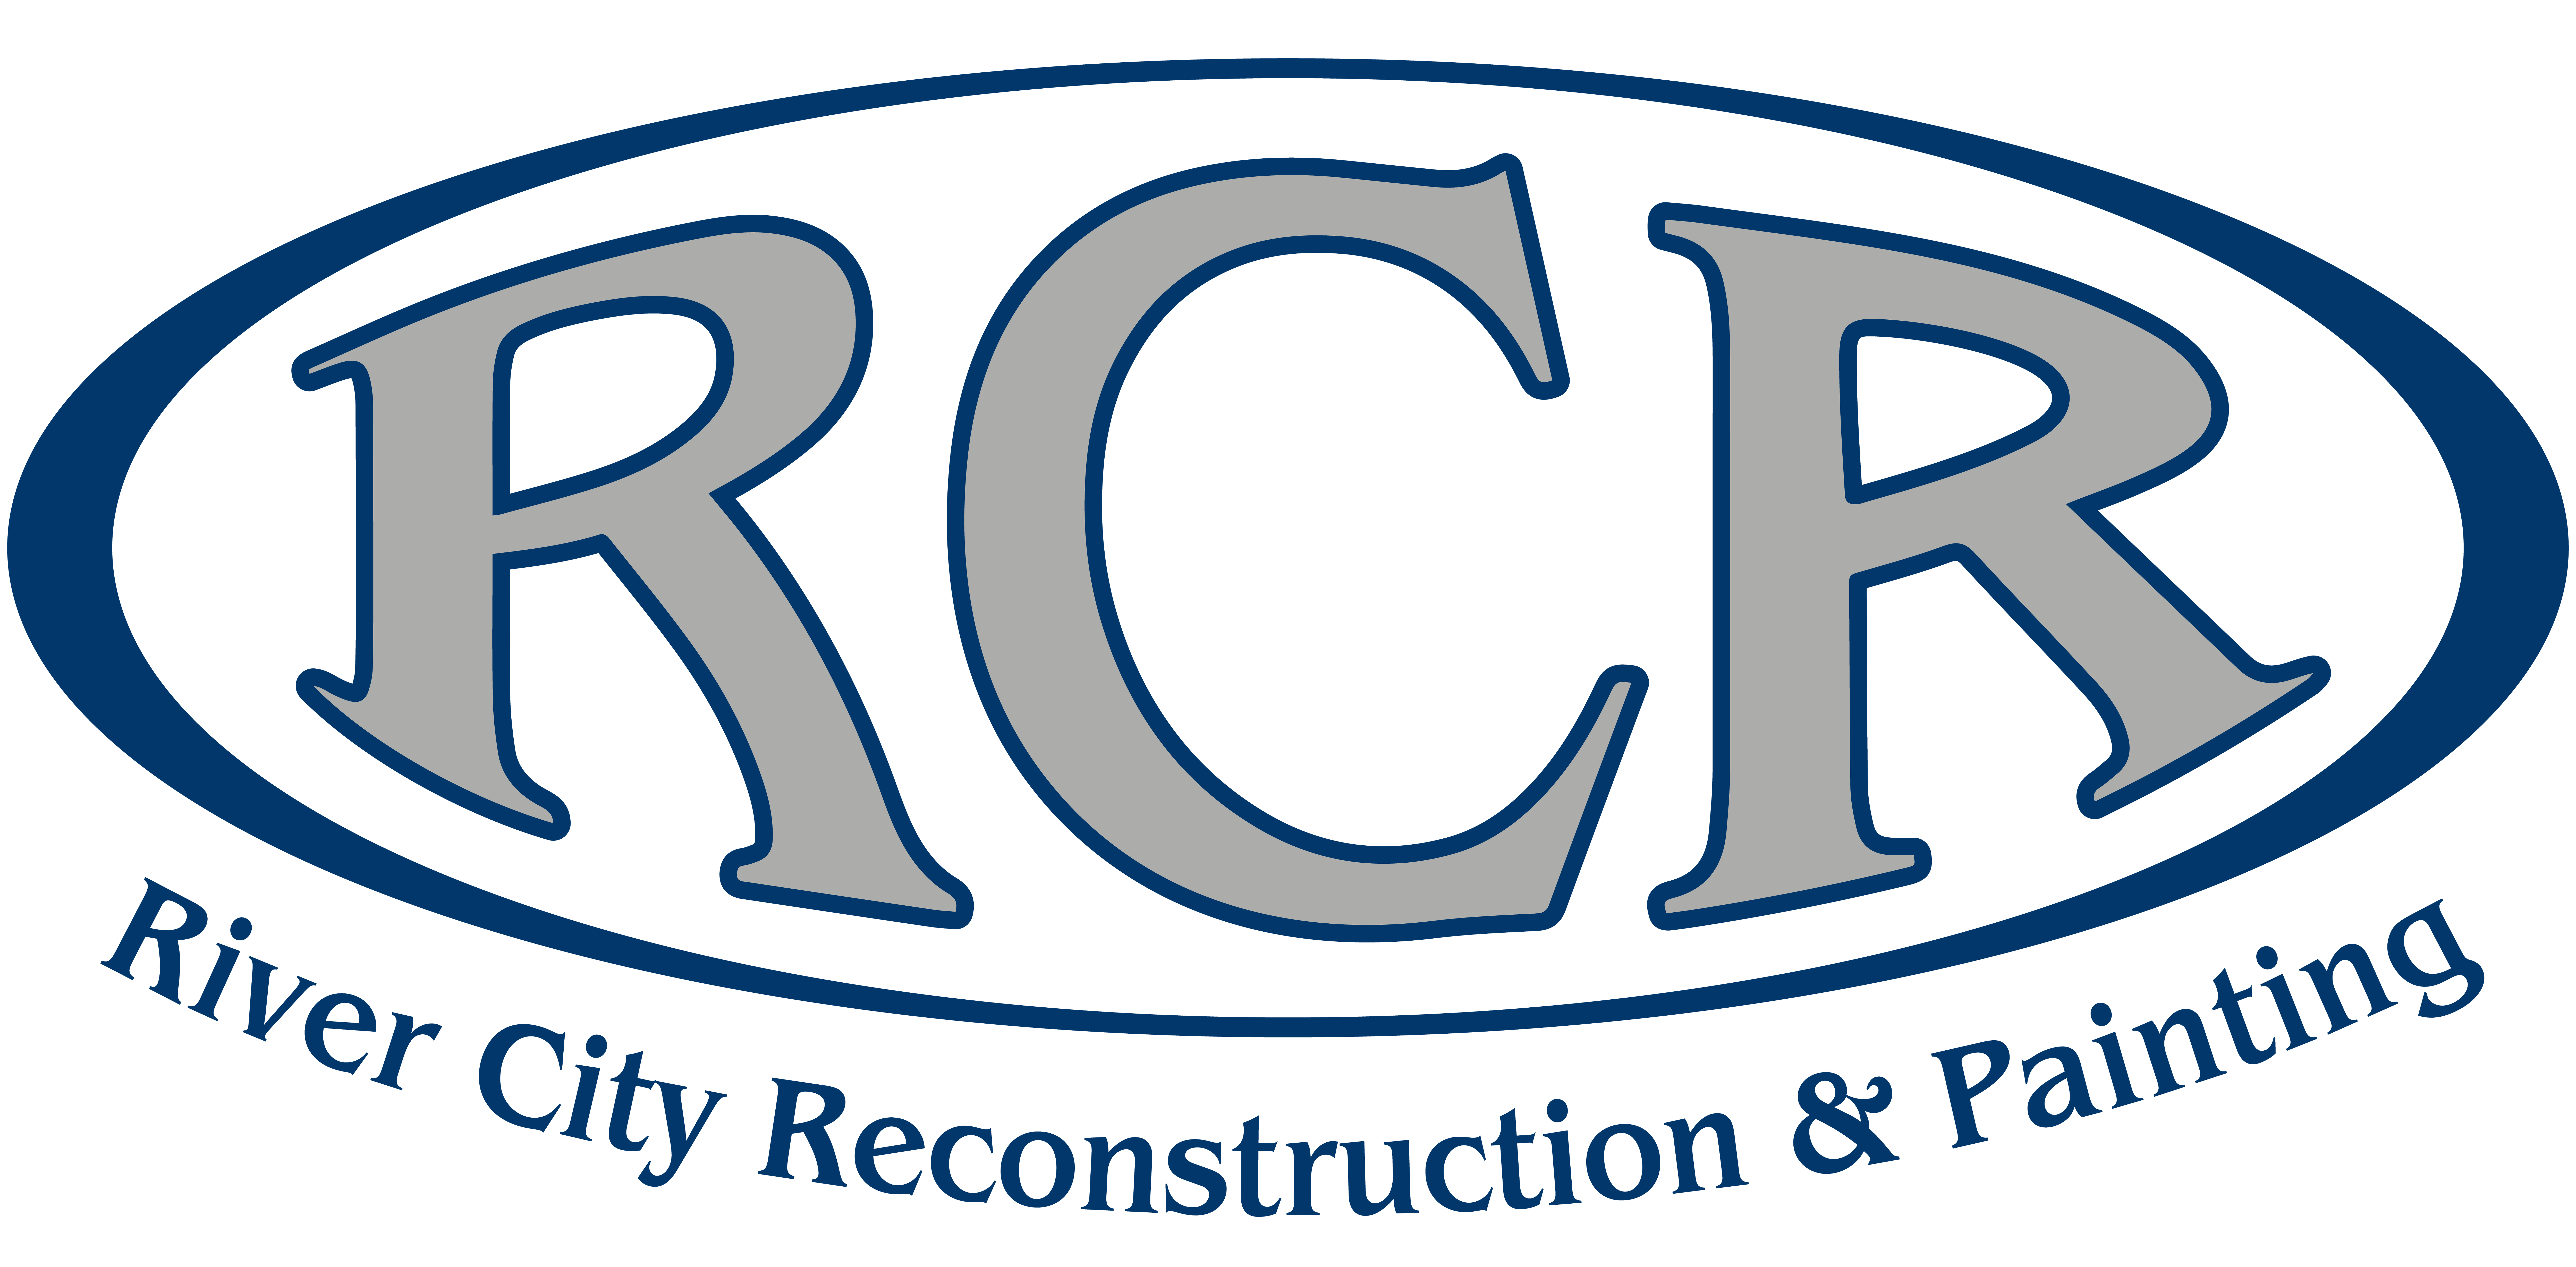 RCR specializes in Residential & Multi-family Repairs